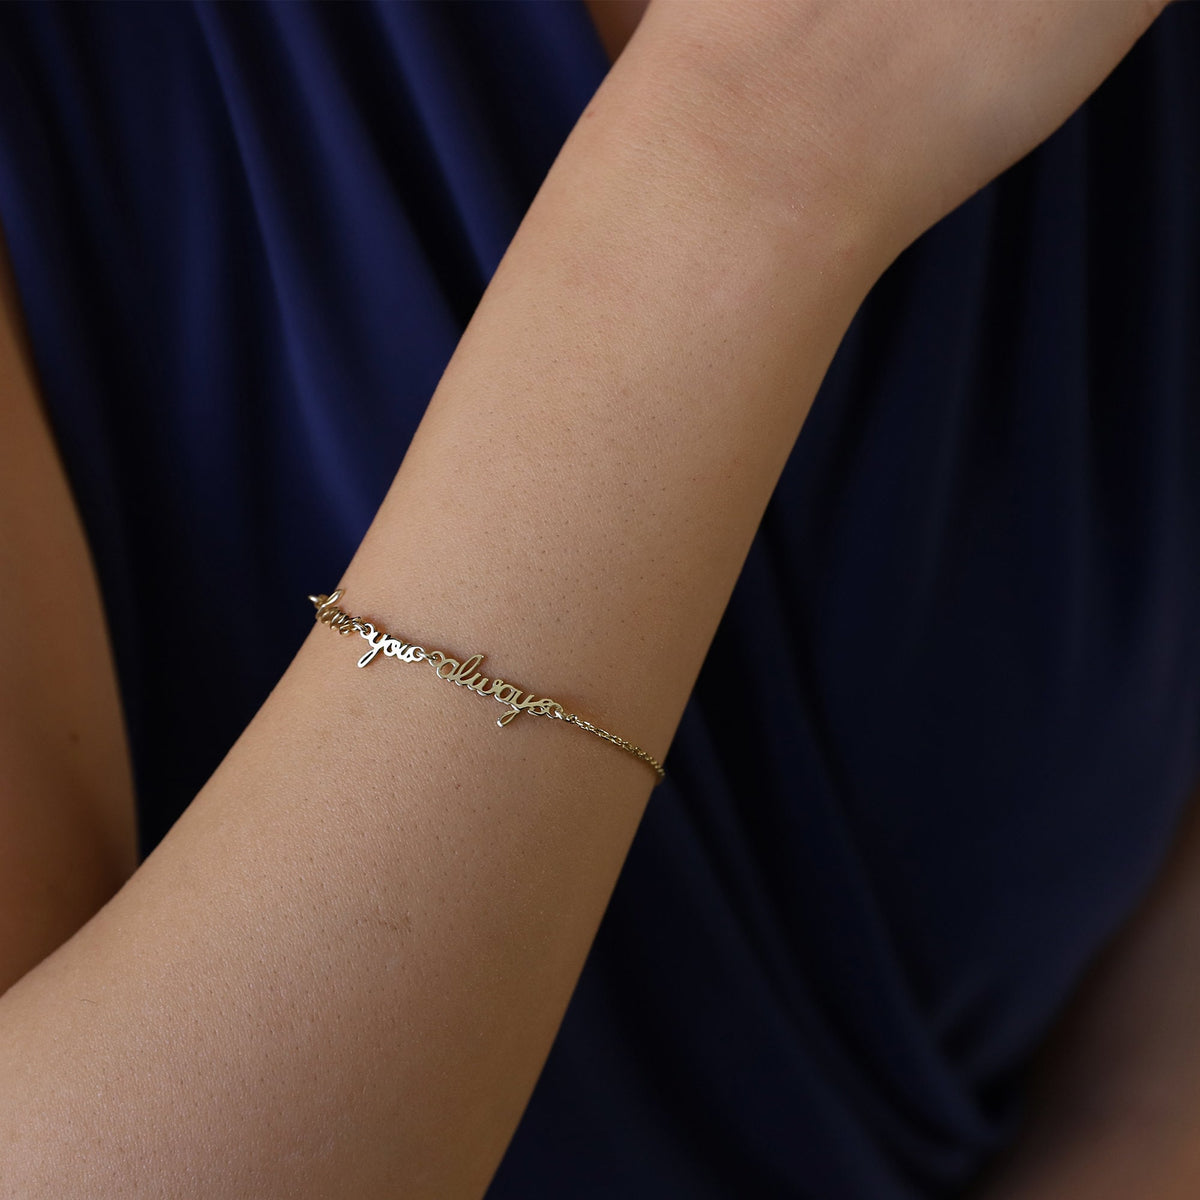 Custom Signature Name Bracelet, Dainty Gold Bracelet | Cute Actual Handwriting Sterling Silver Bracelet | Perfect Jewelry Gifts for Her